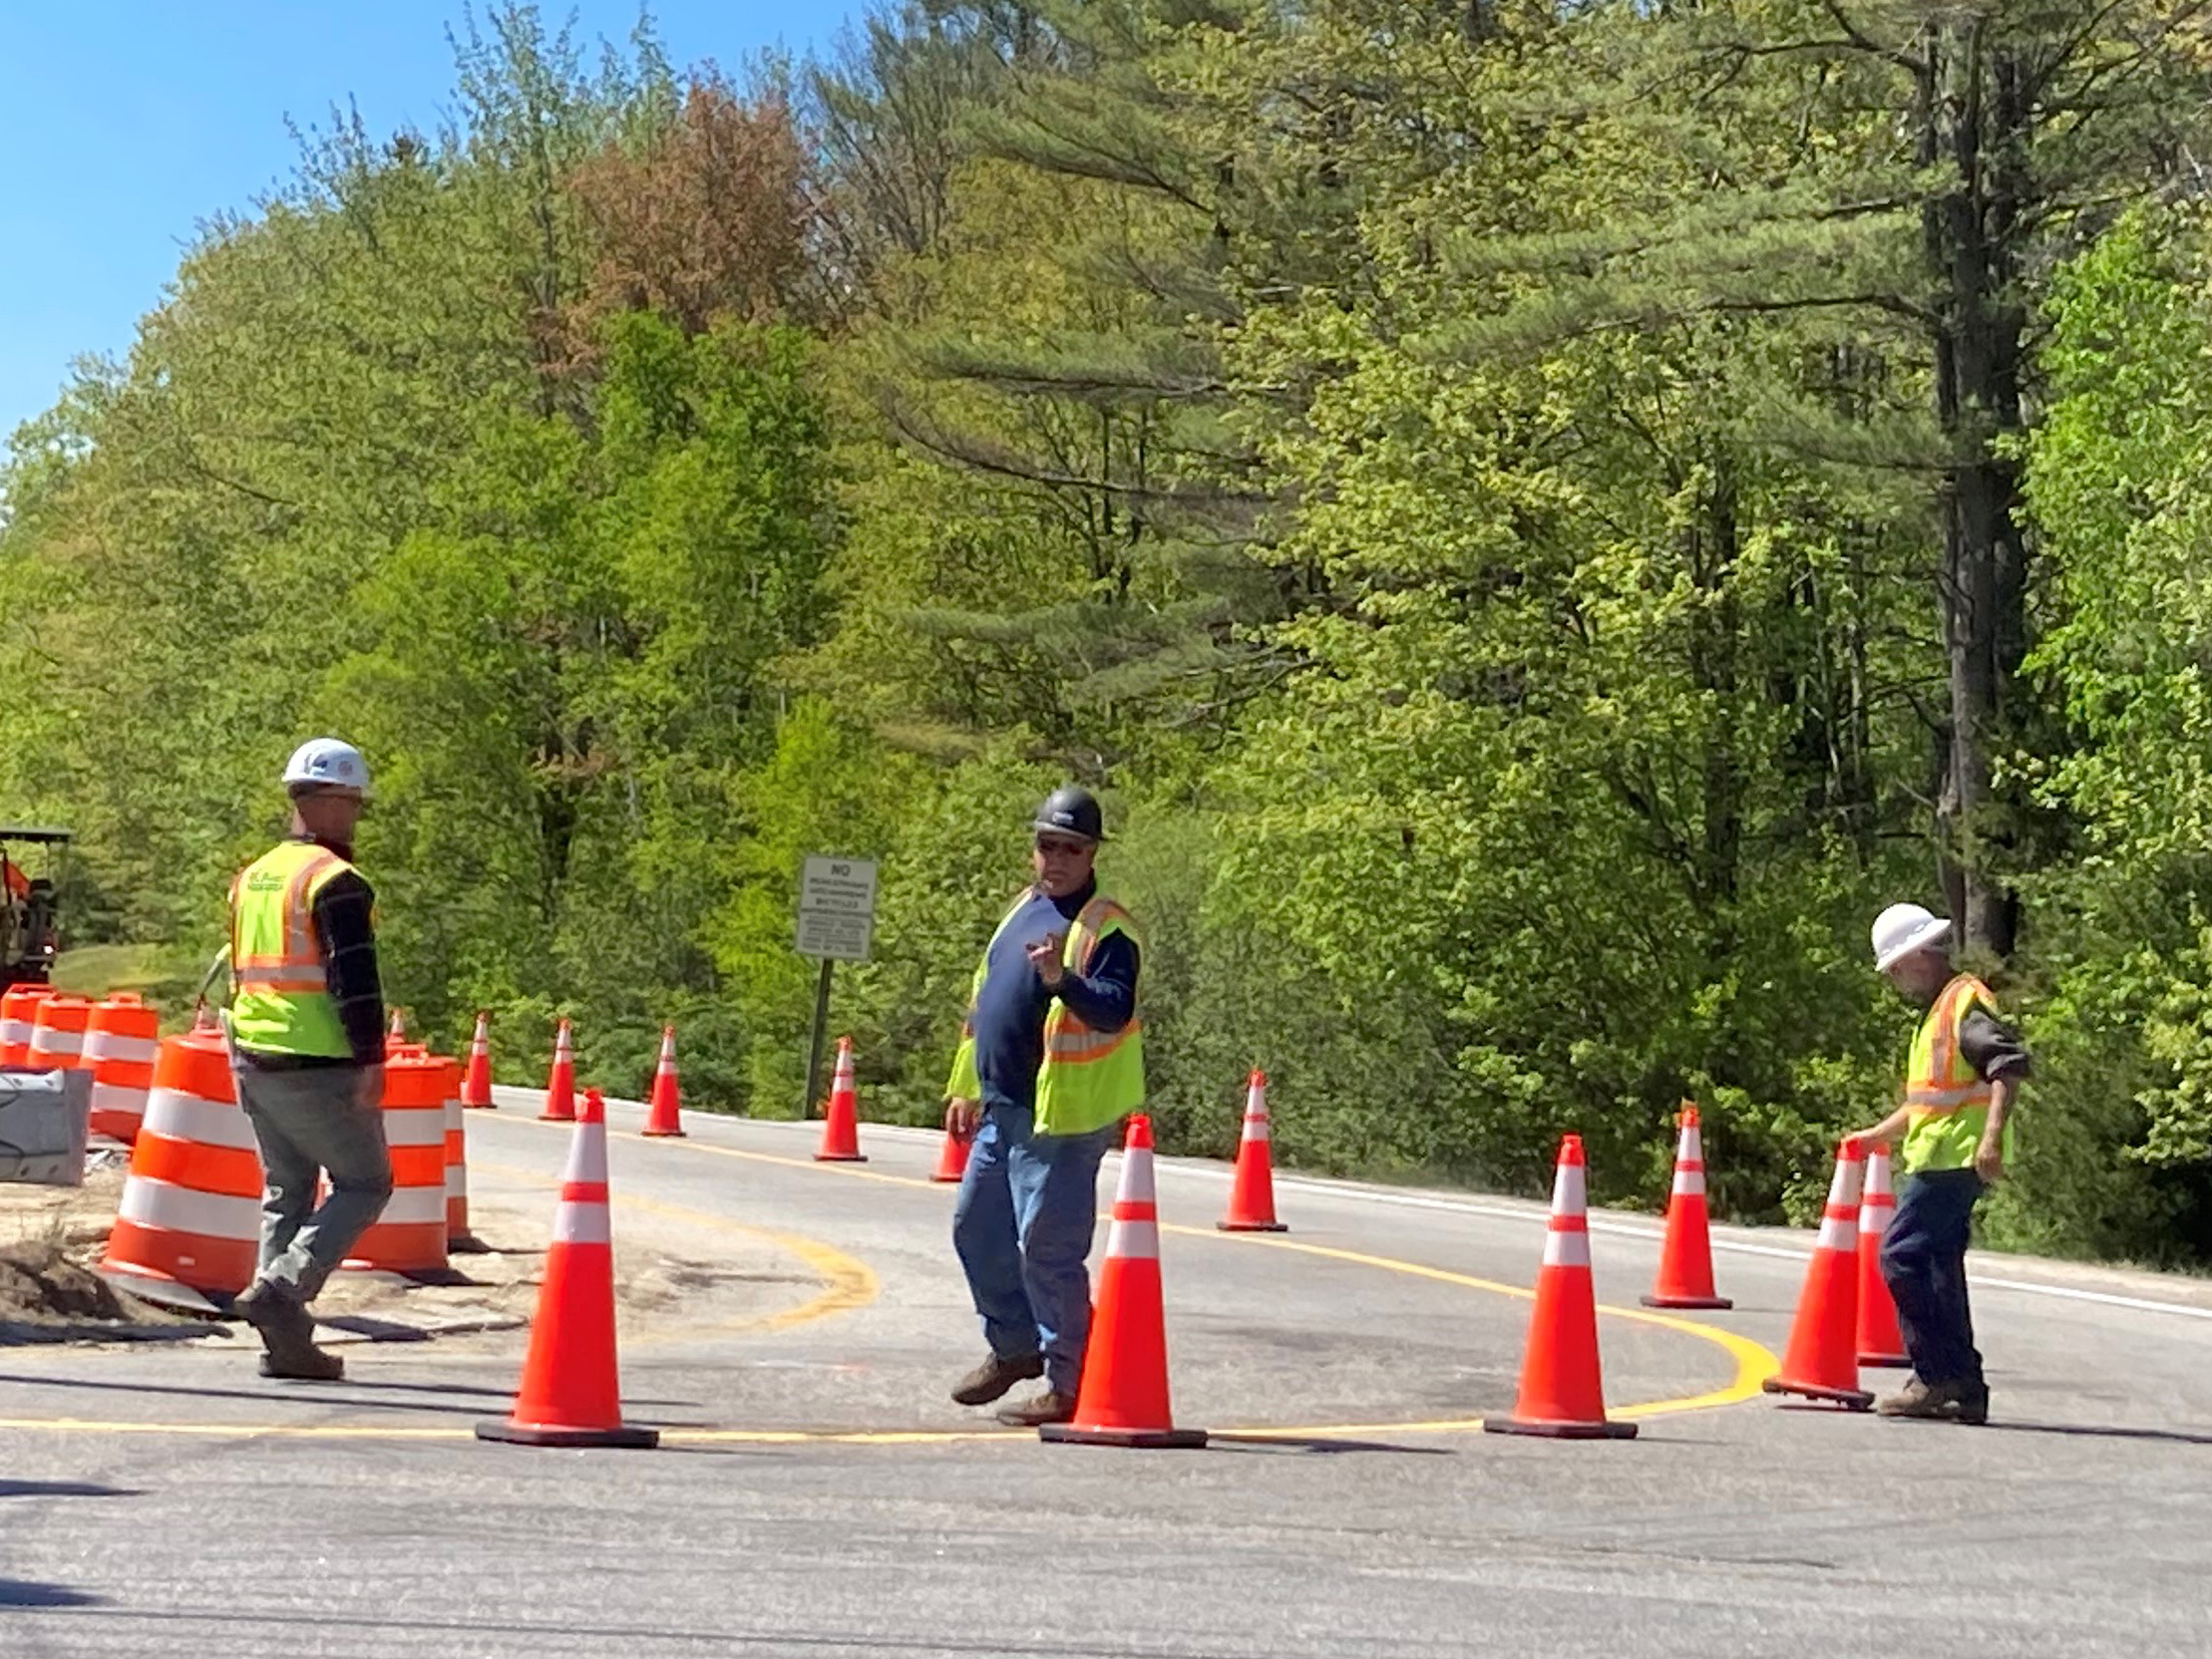 Workers place large safety cones in the road to indicate temporary lanes.